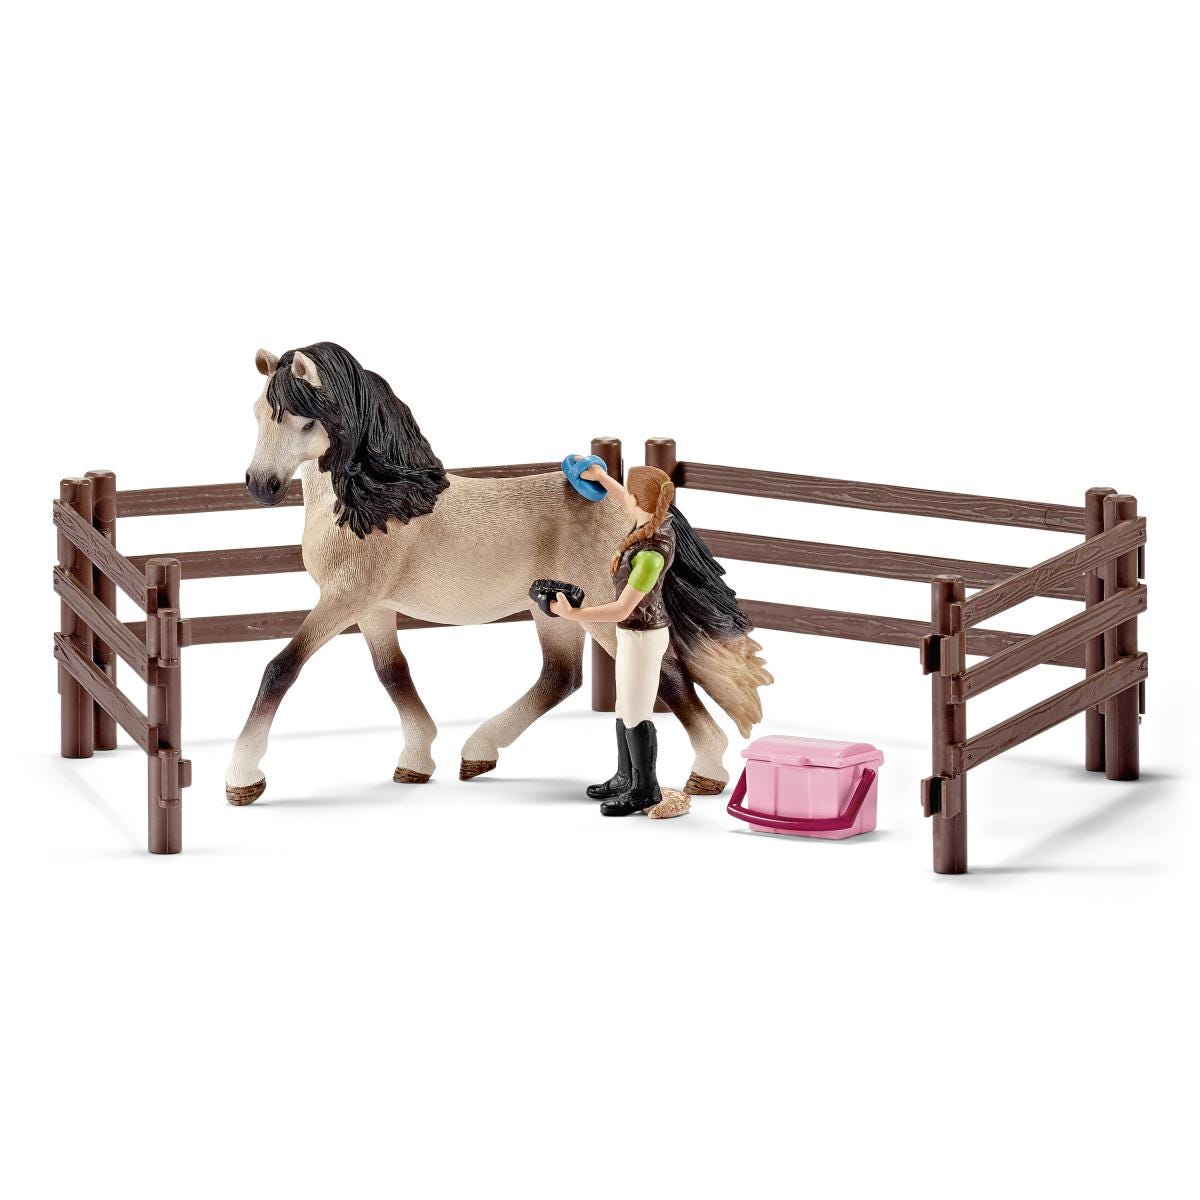 Horse care set, Andalusian